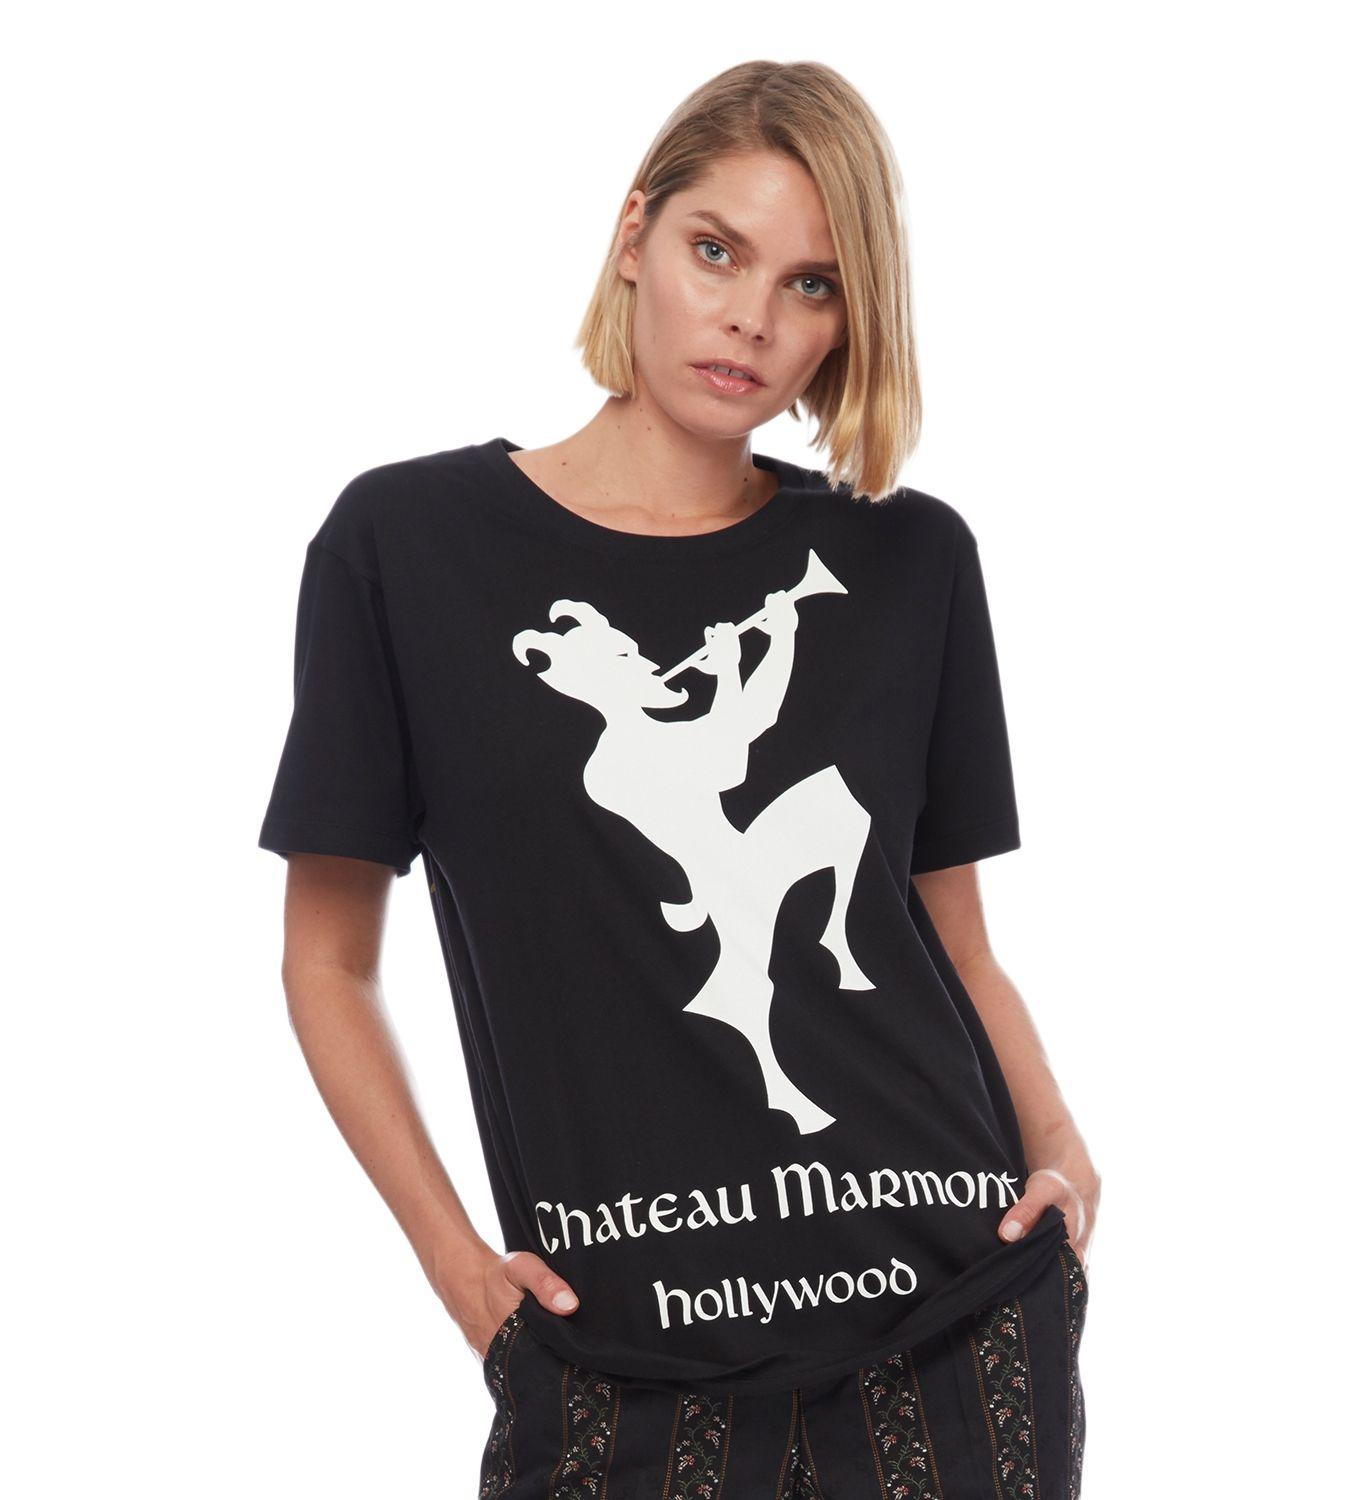 gucci chateau marmont tee